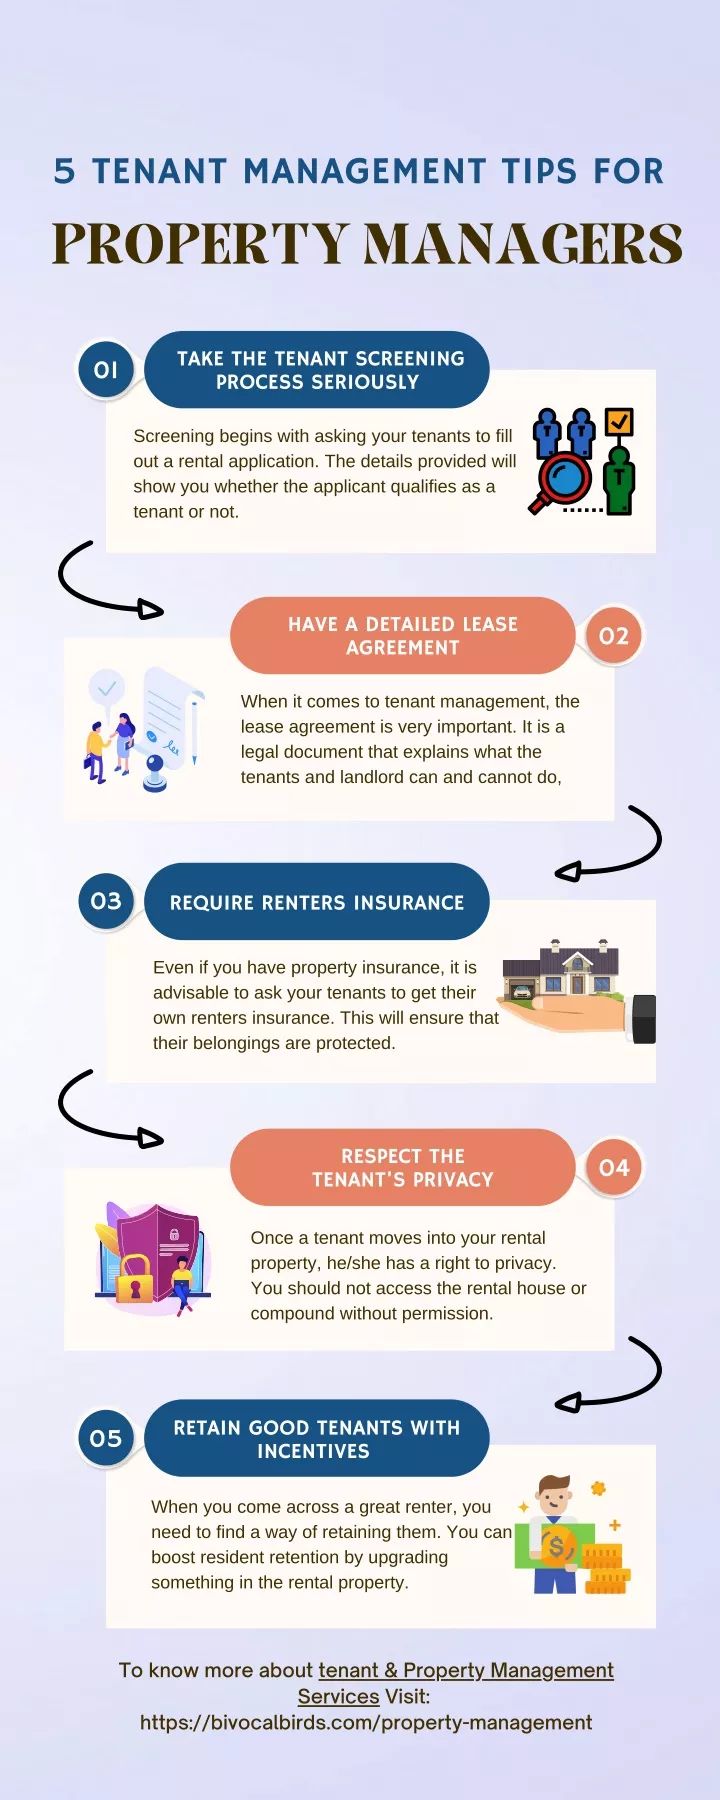 5 tenant management tips for property managers